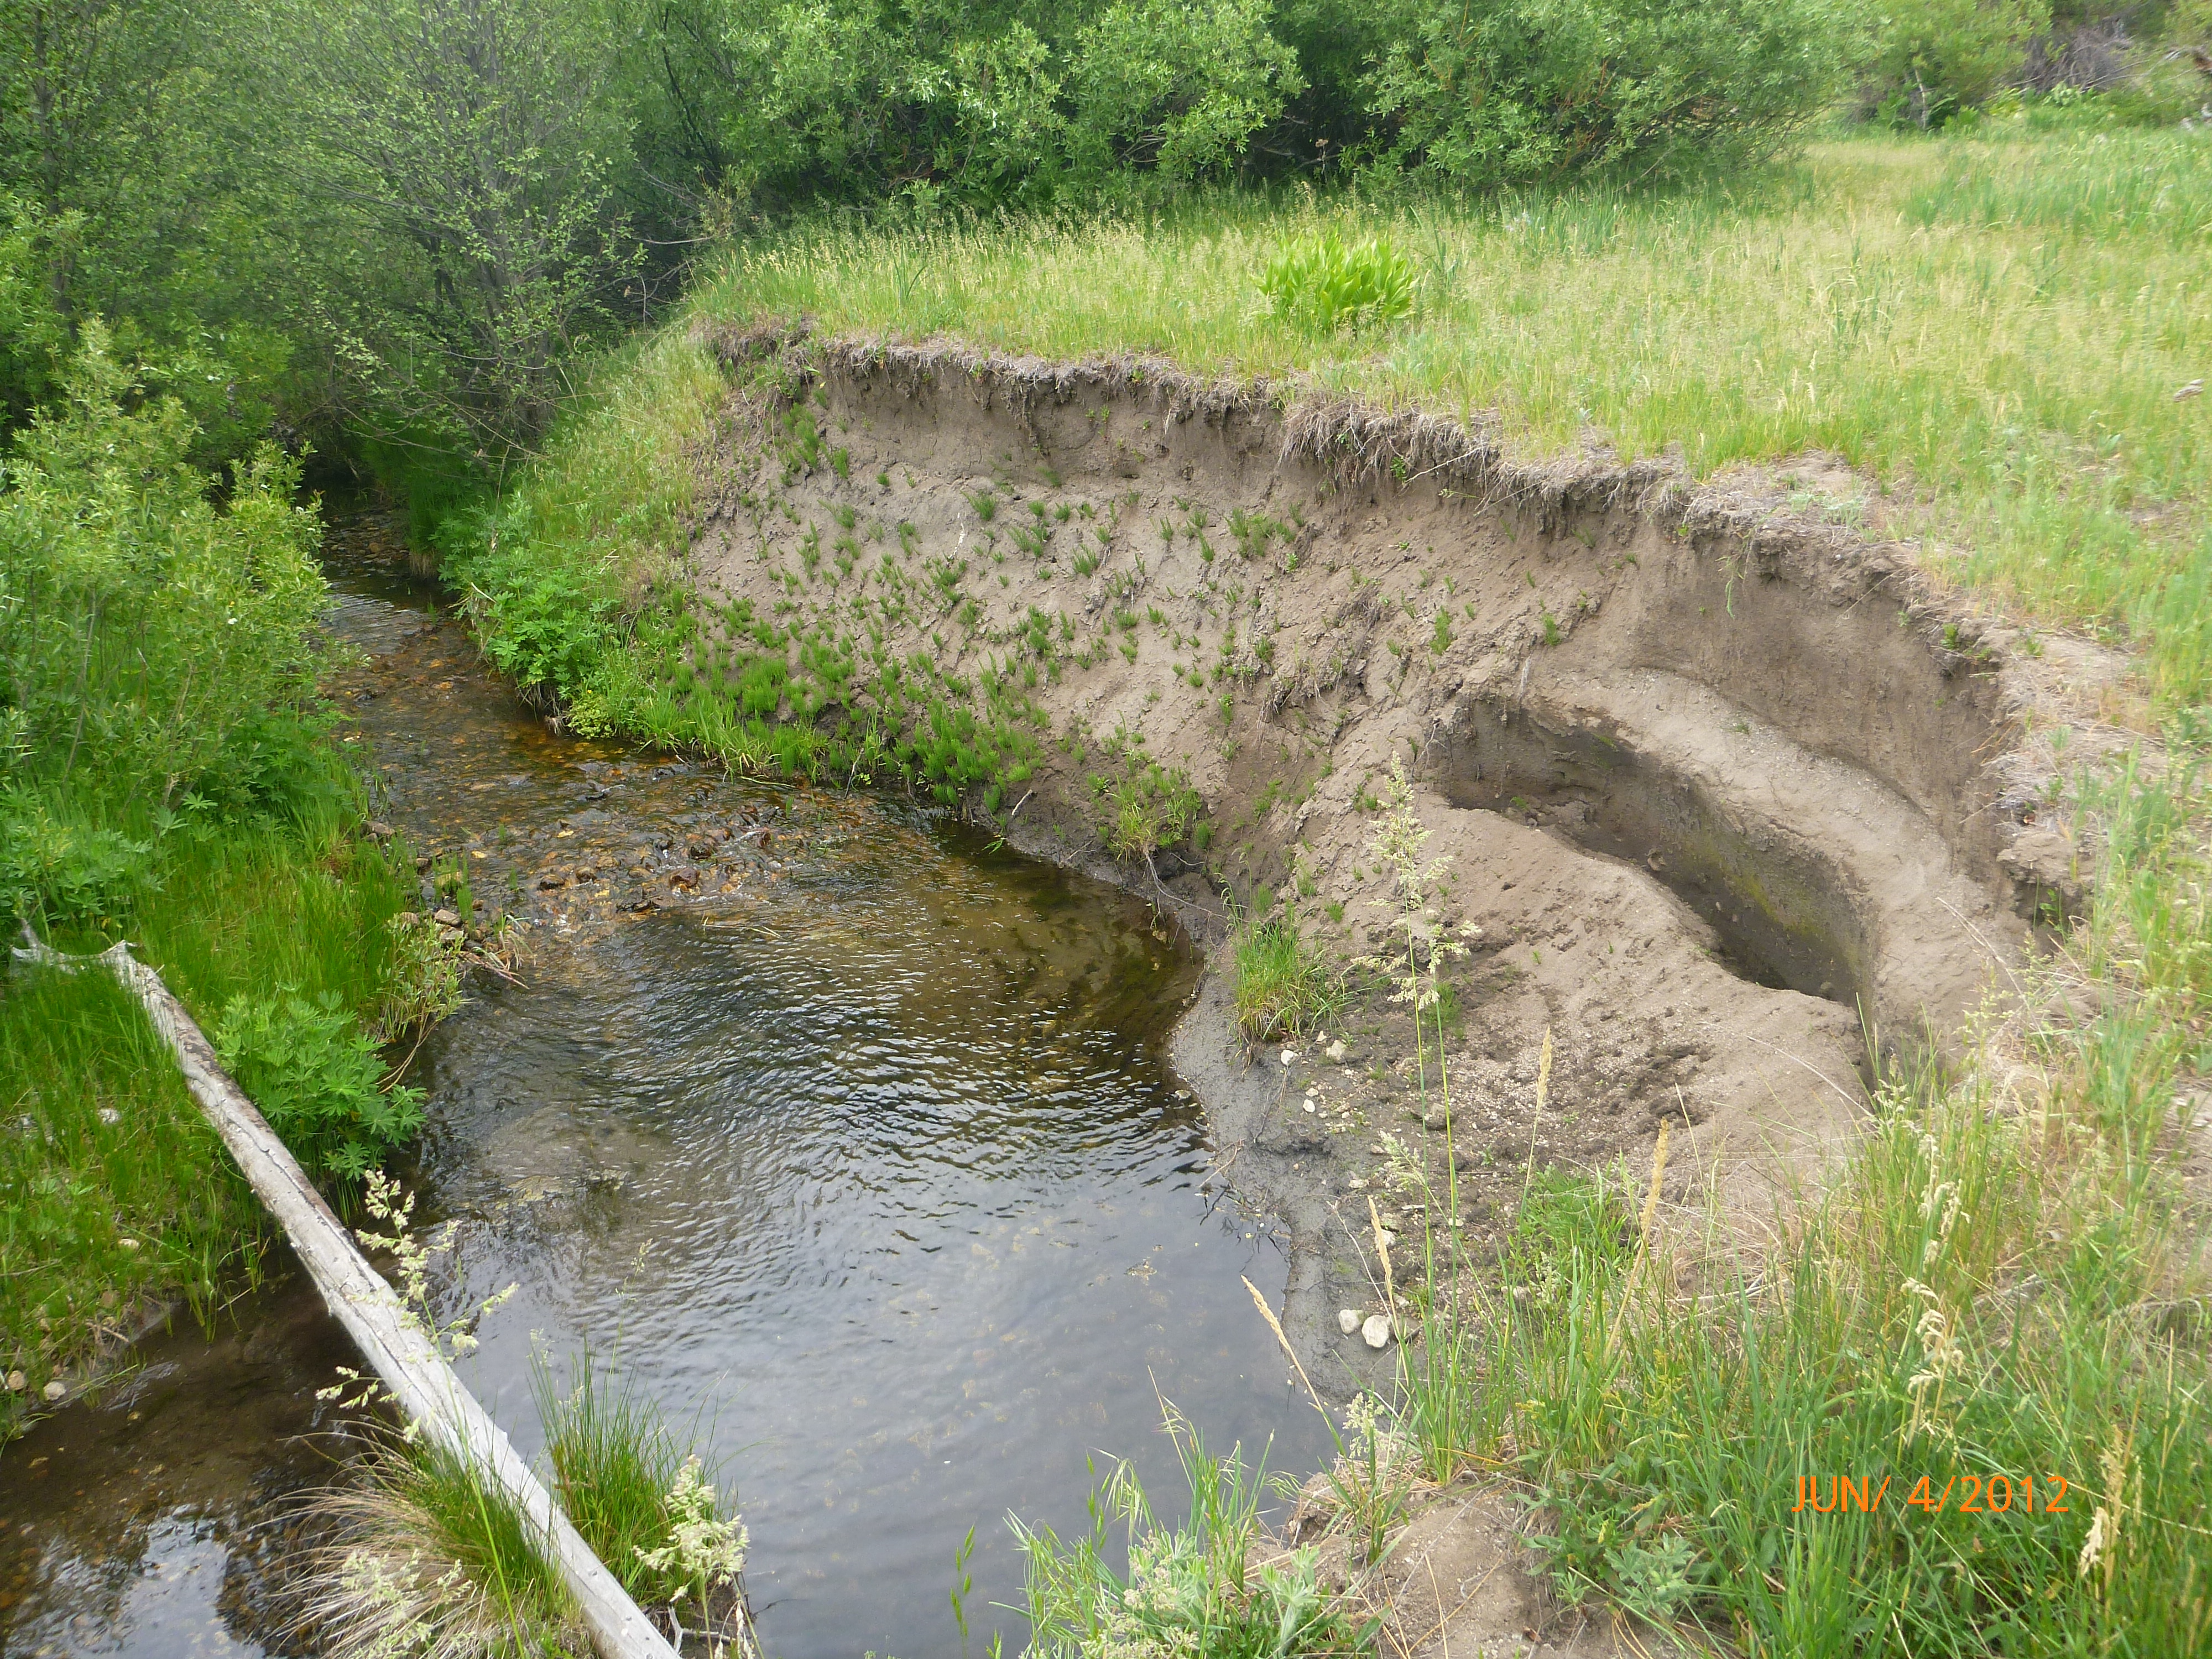 Ackerson Meadow | The significant incision photo shows a degraded bank on a stream in Ackerson Meadow